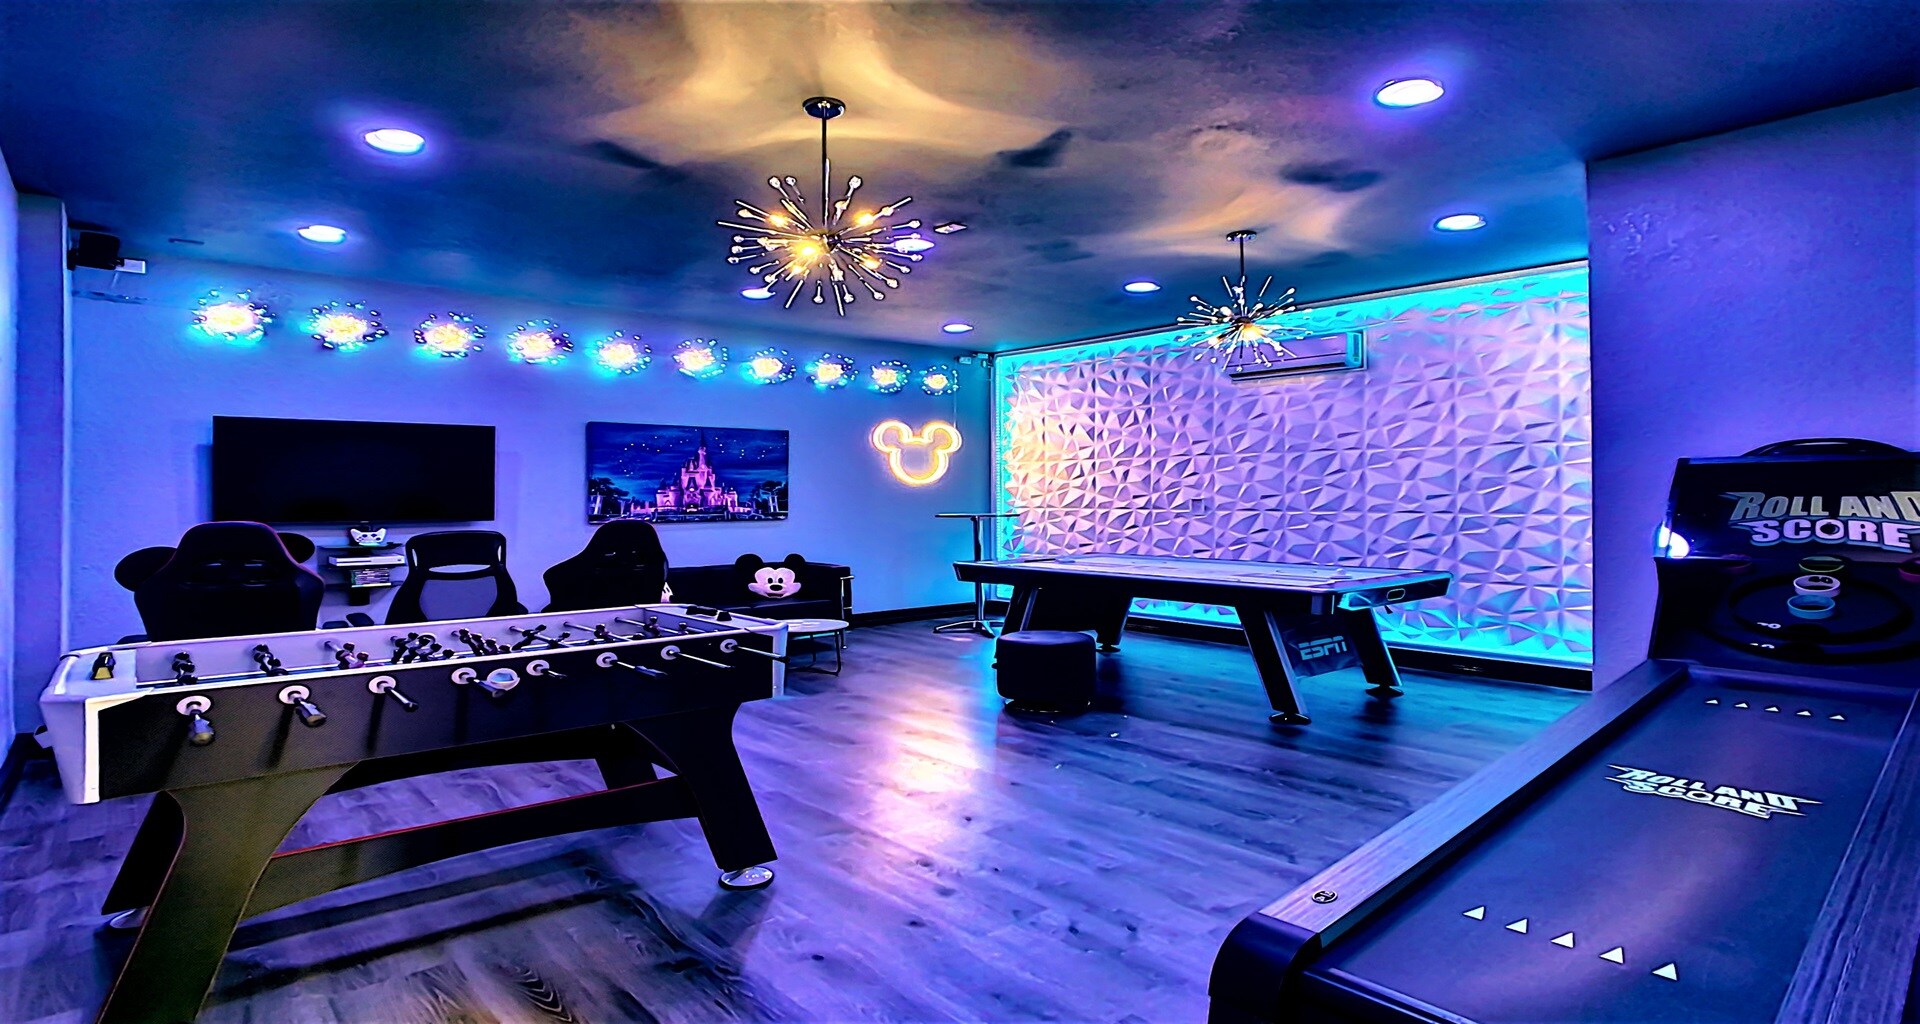 The game room is stylishly furnished with theme and cool lights